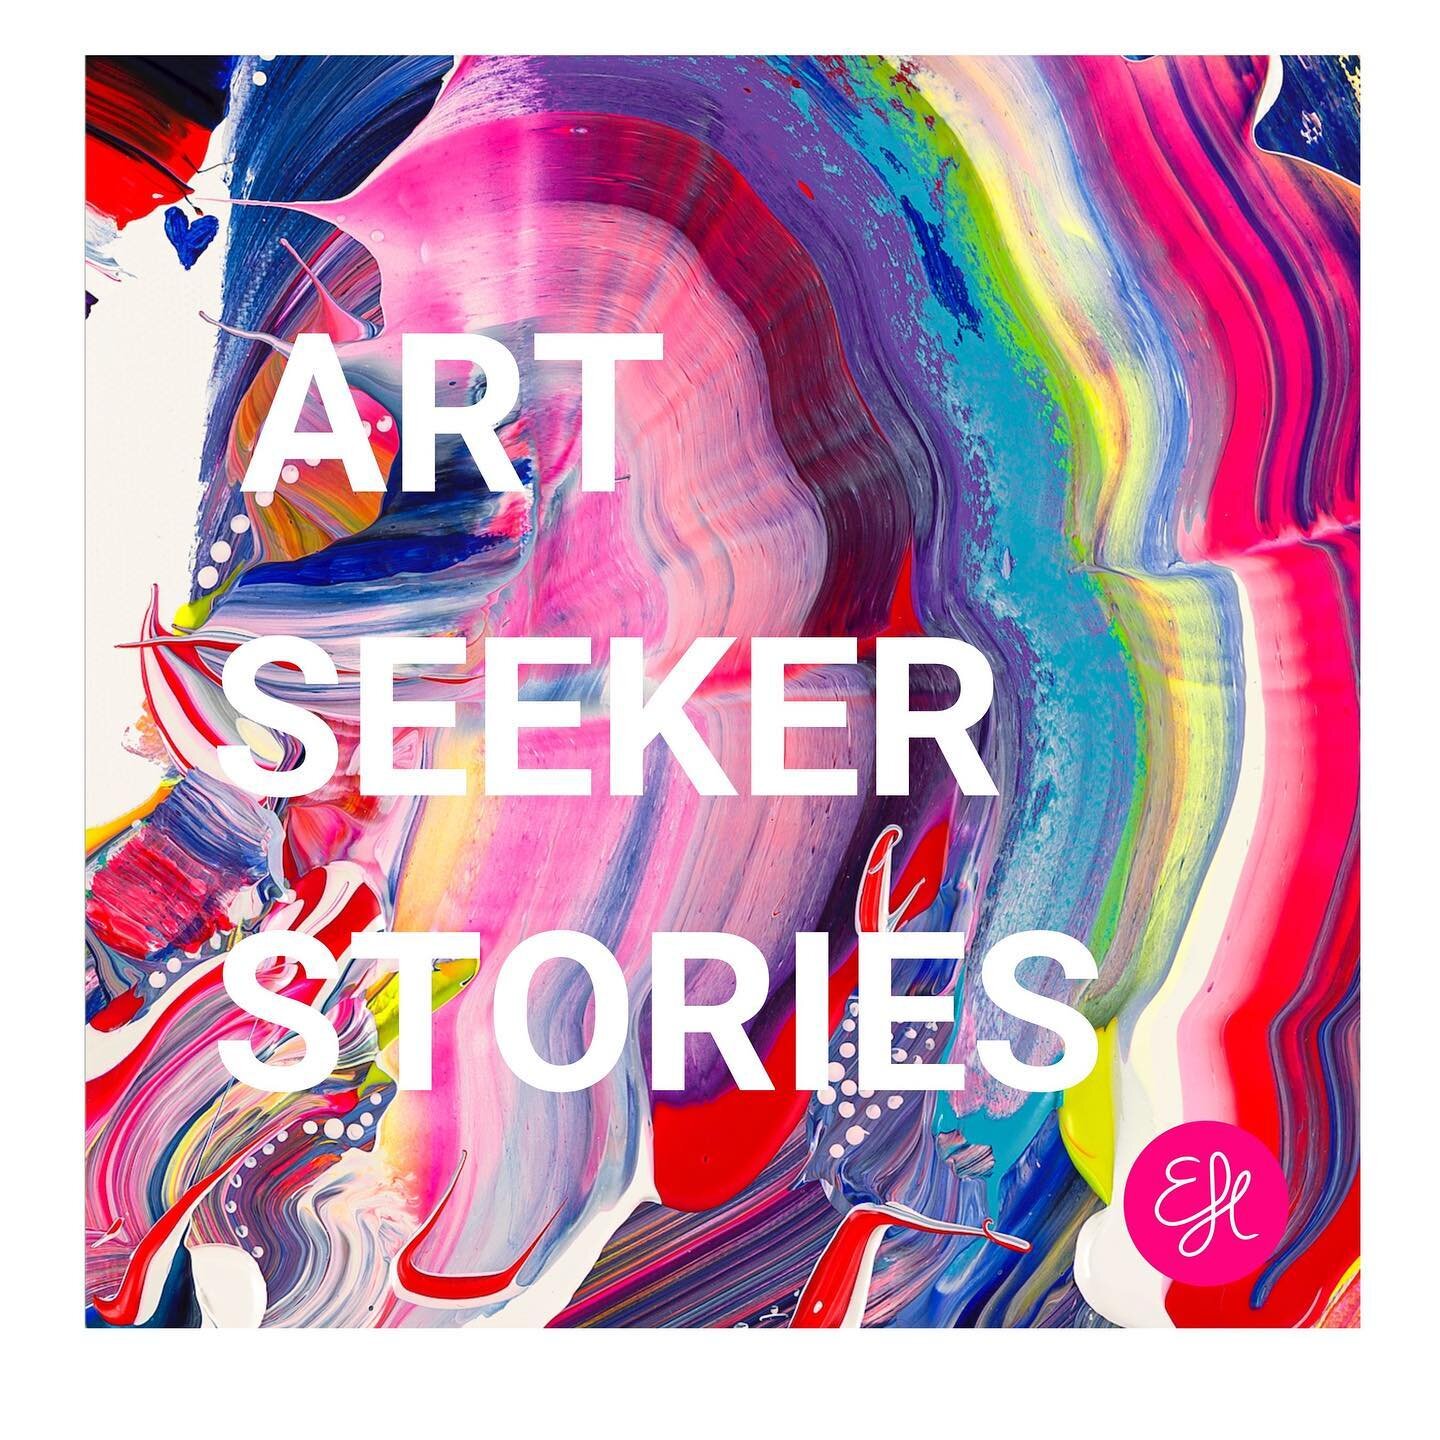 Welcome to the new format ART SEEKER STORIES Podcast. It&rsquo;s been a while and I&rsquo;ve missed it. New postcard - mini bite sized, approx 15 mins episodes are coming. 
First out tomorrow!!!!

Episodes are excerpts from my diary on my art seeking